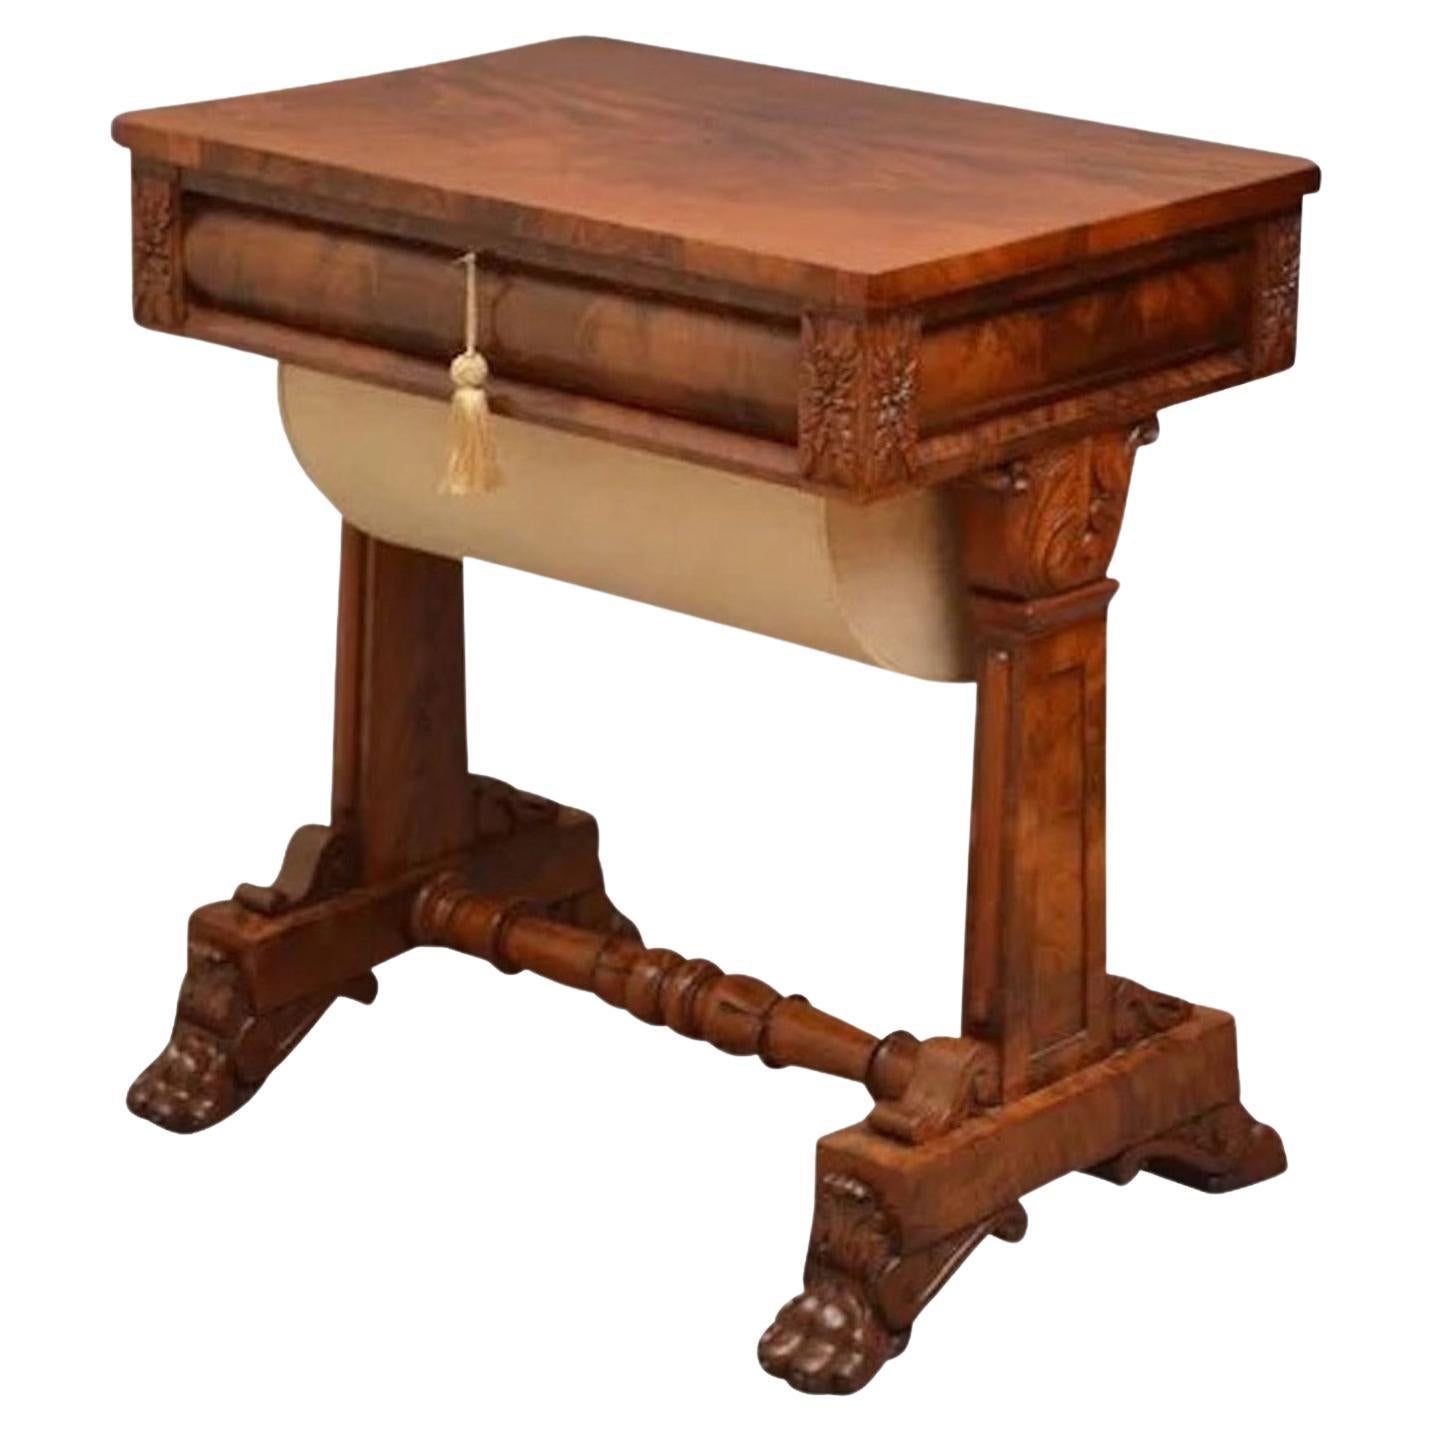 Impressive William IV Mahogany Sewing Table For Sale